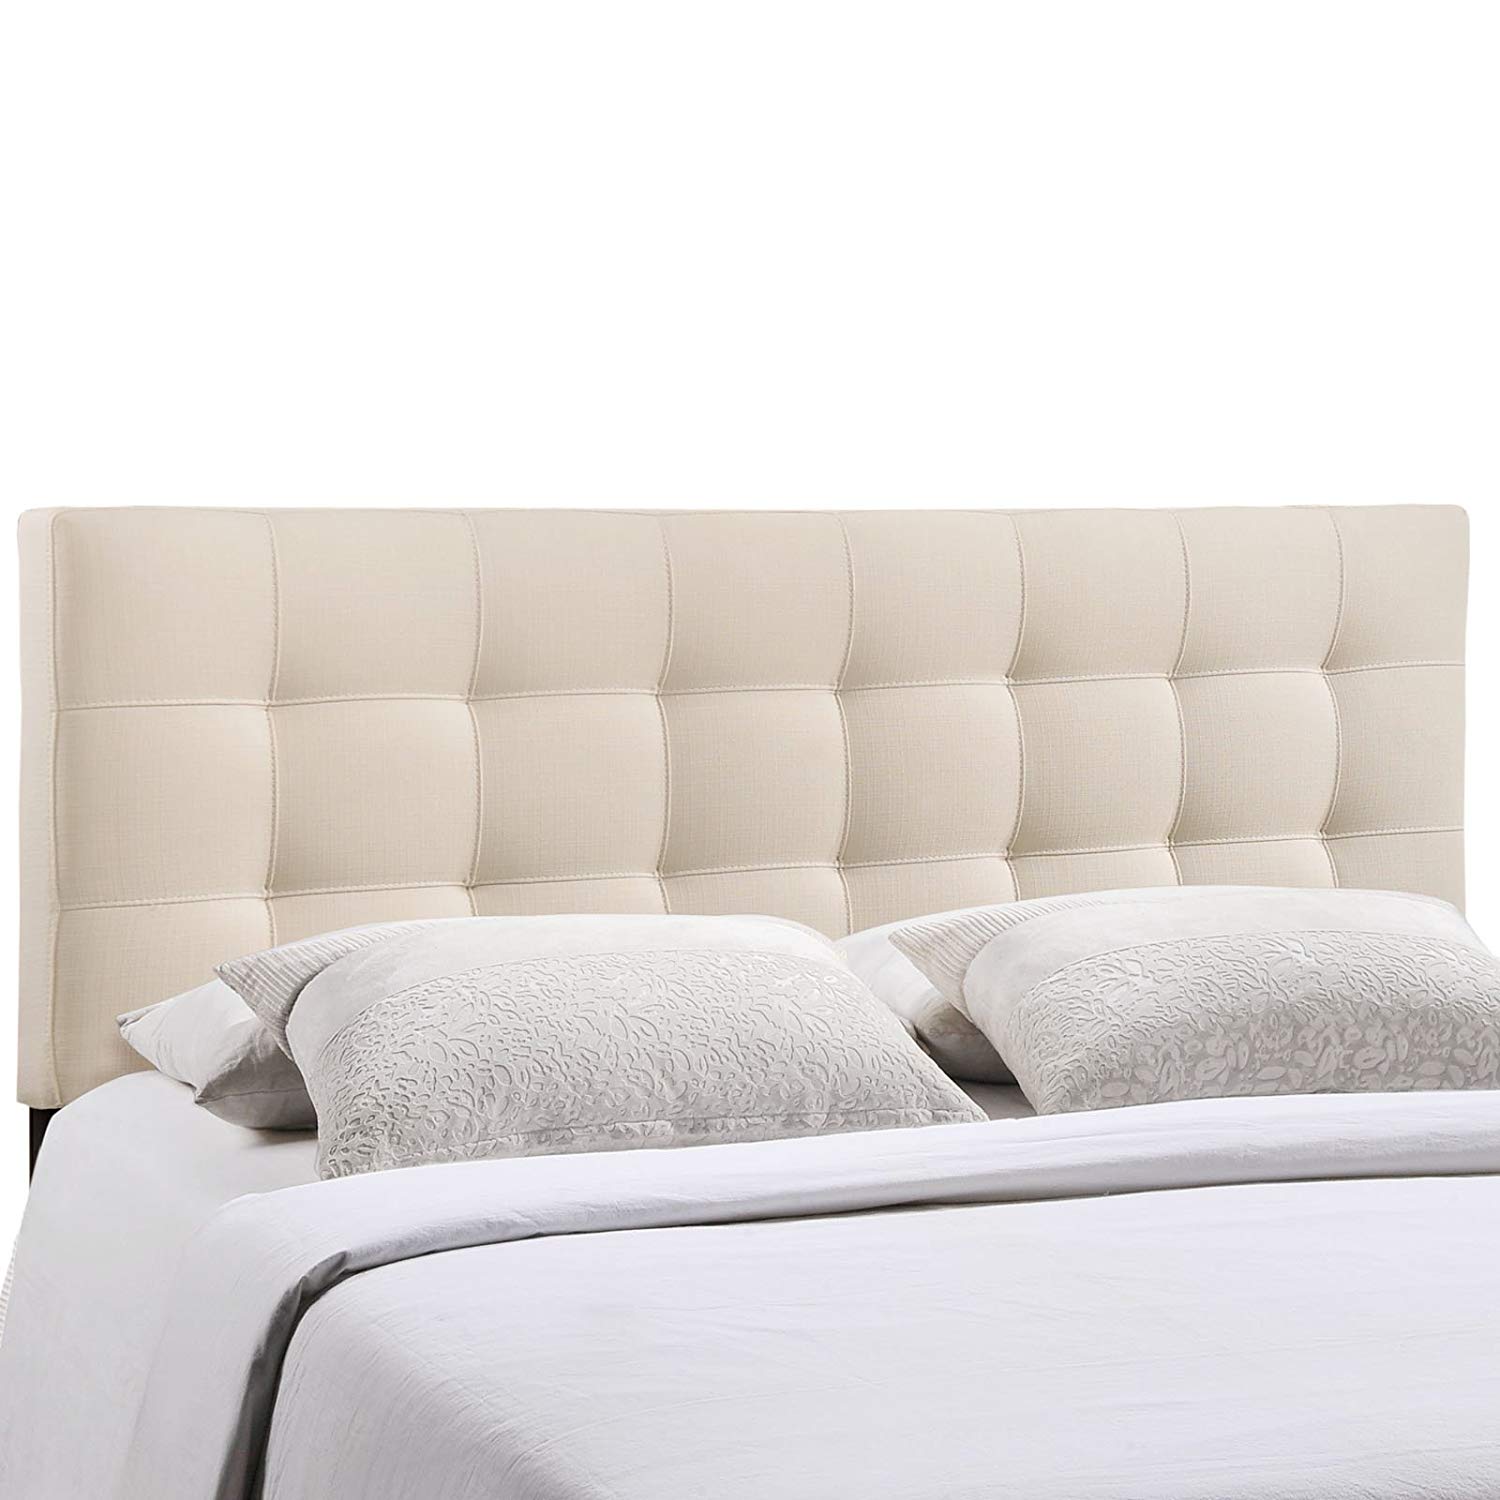 Traveller Location - Modway AMZ-5041-IVO Lily Upholstered Tufted Fabric Queen  Headboard Size in Ivory -